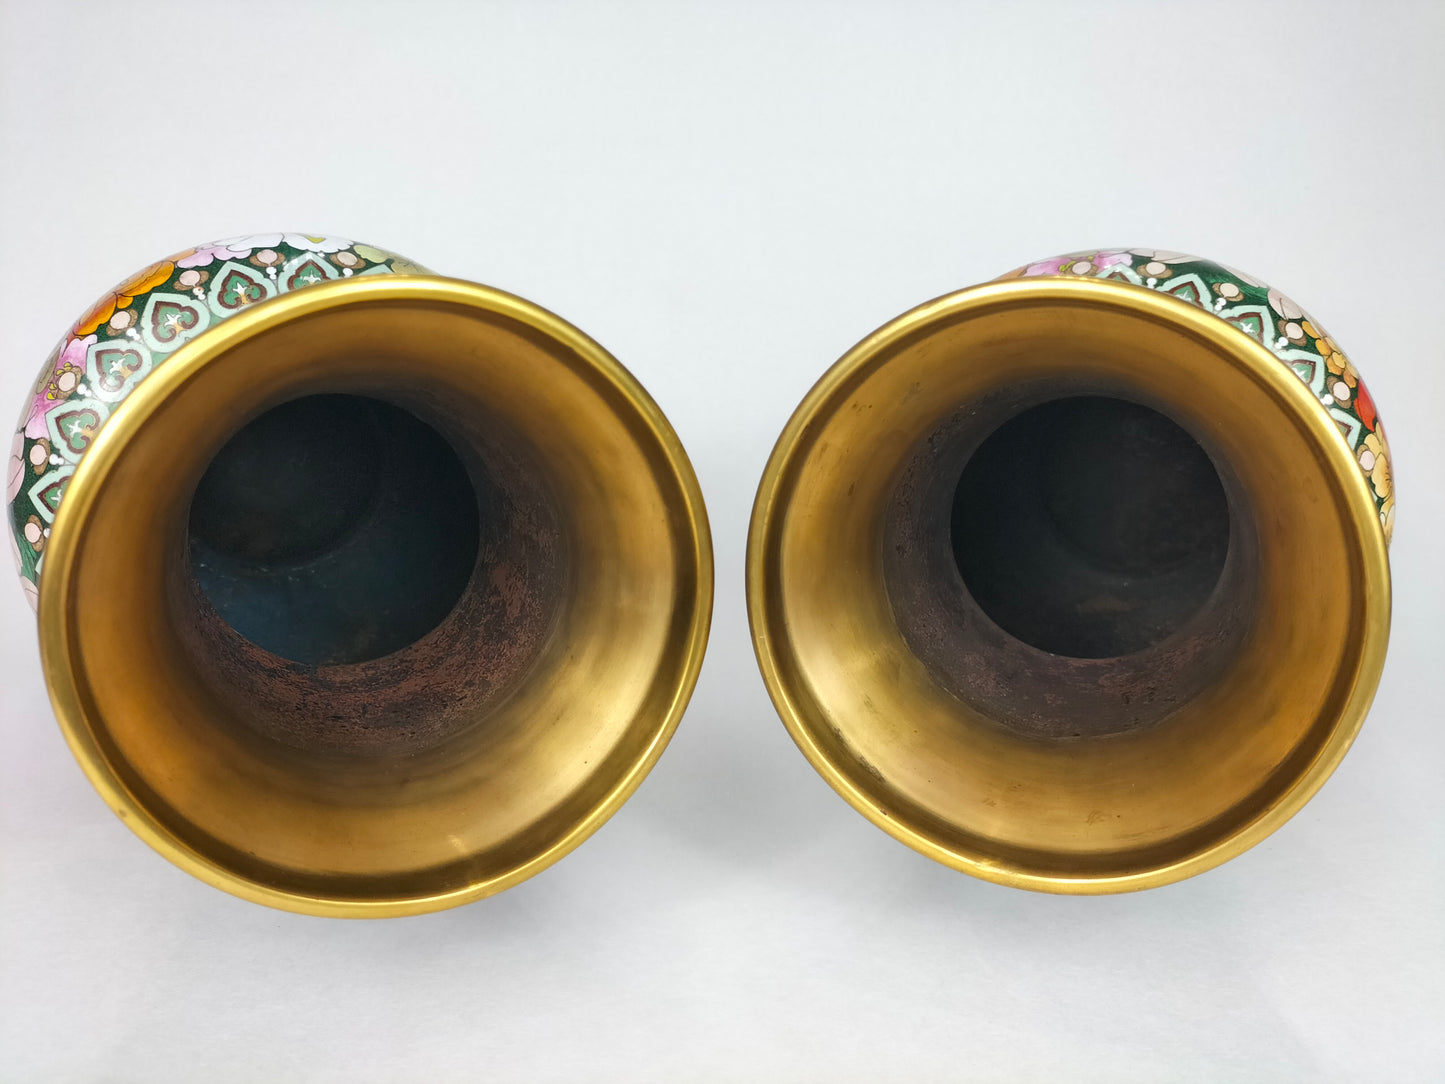 Large pair of Chinese cloisonne millefleur vases // 20th century